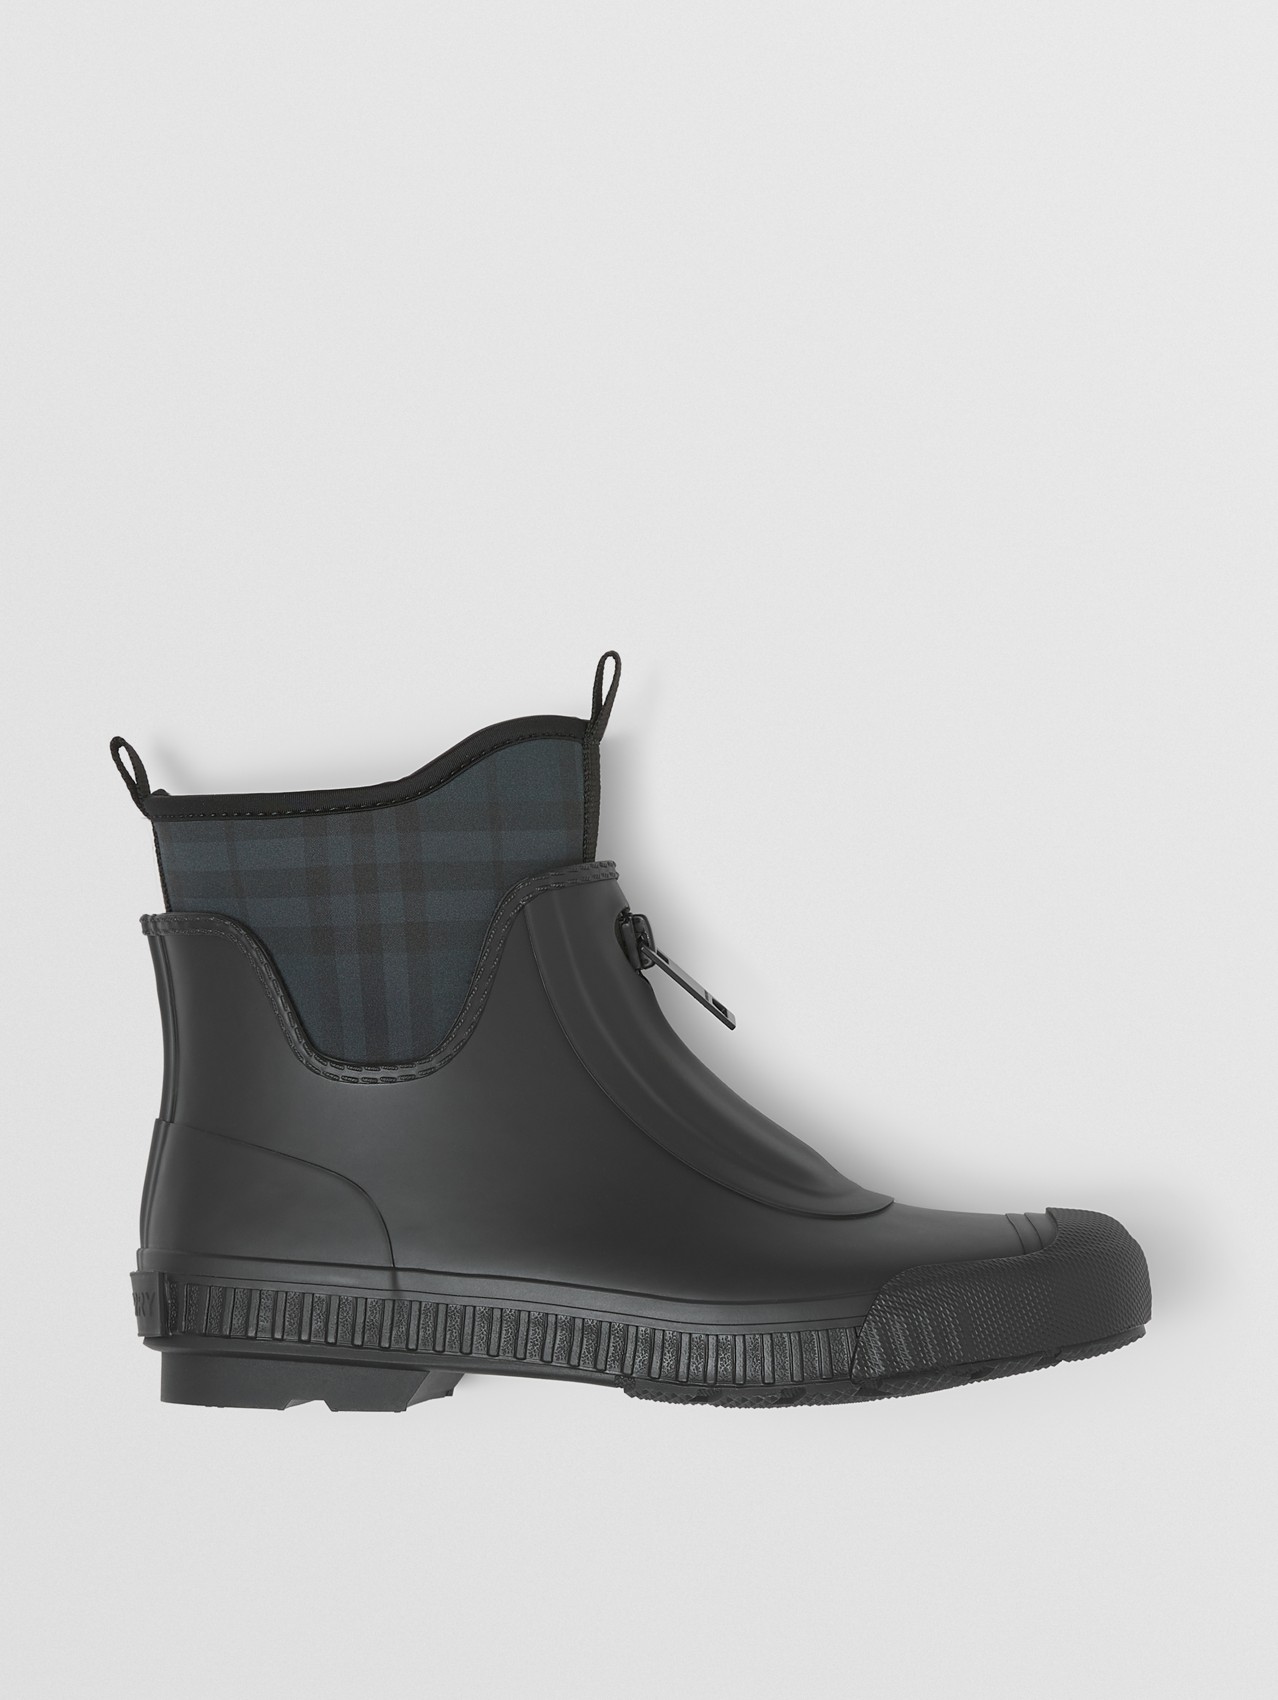 Vintage Check Neoprene and Rubber Rain Boots in Black/charcoal